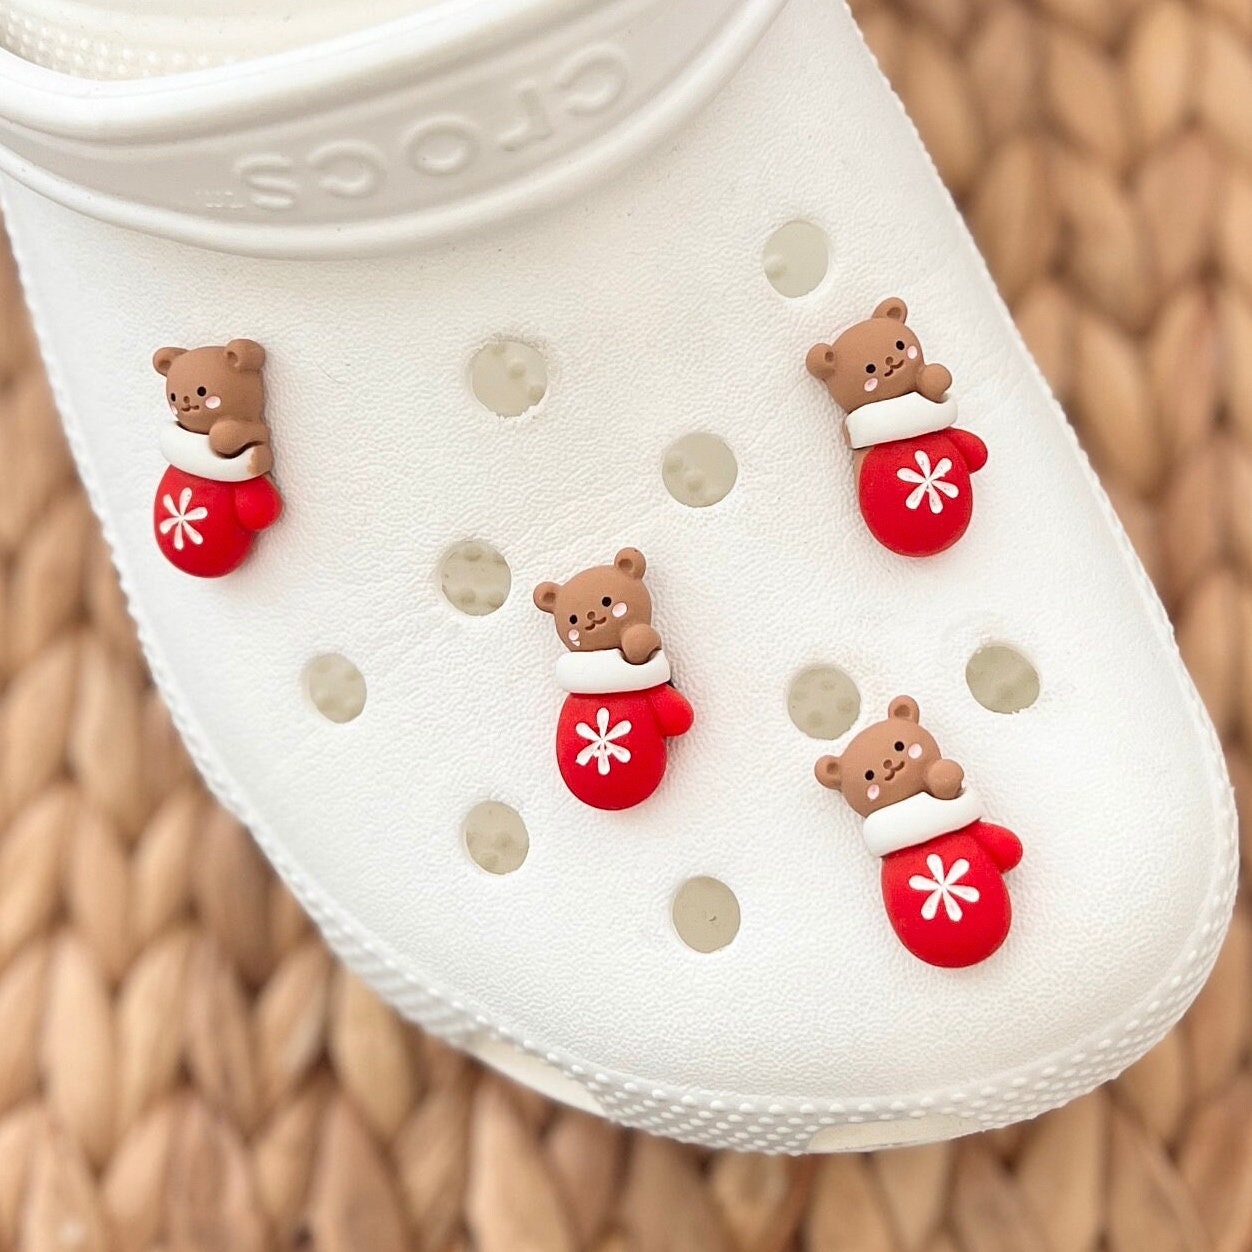 RED GLITTER Bear & Heart Shoe Charms, Croc Charms, Shoe Decorations, Bling  Charms, Bling Jibbitz, Jibbitz, Charms, Crocs, Croc Charms 